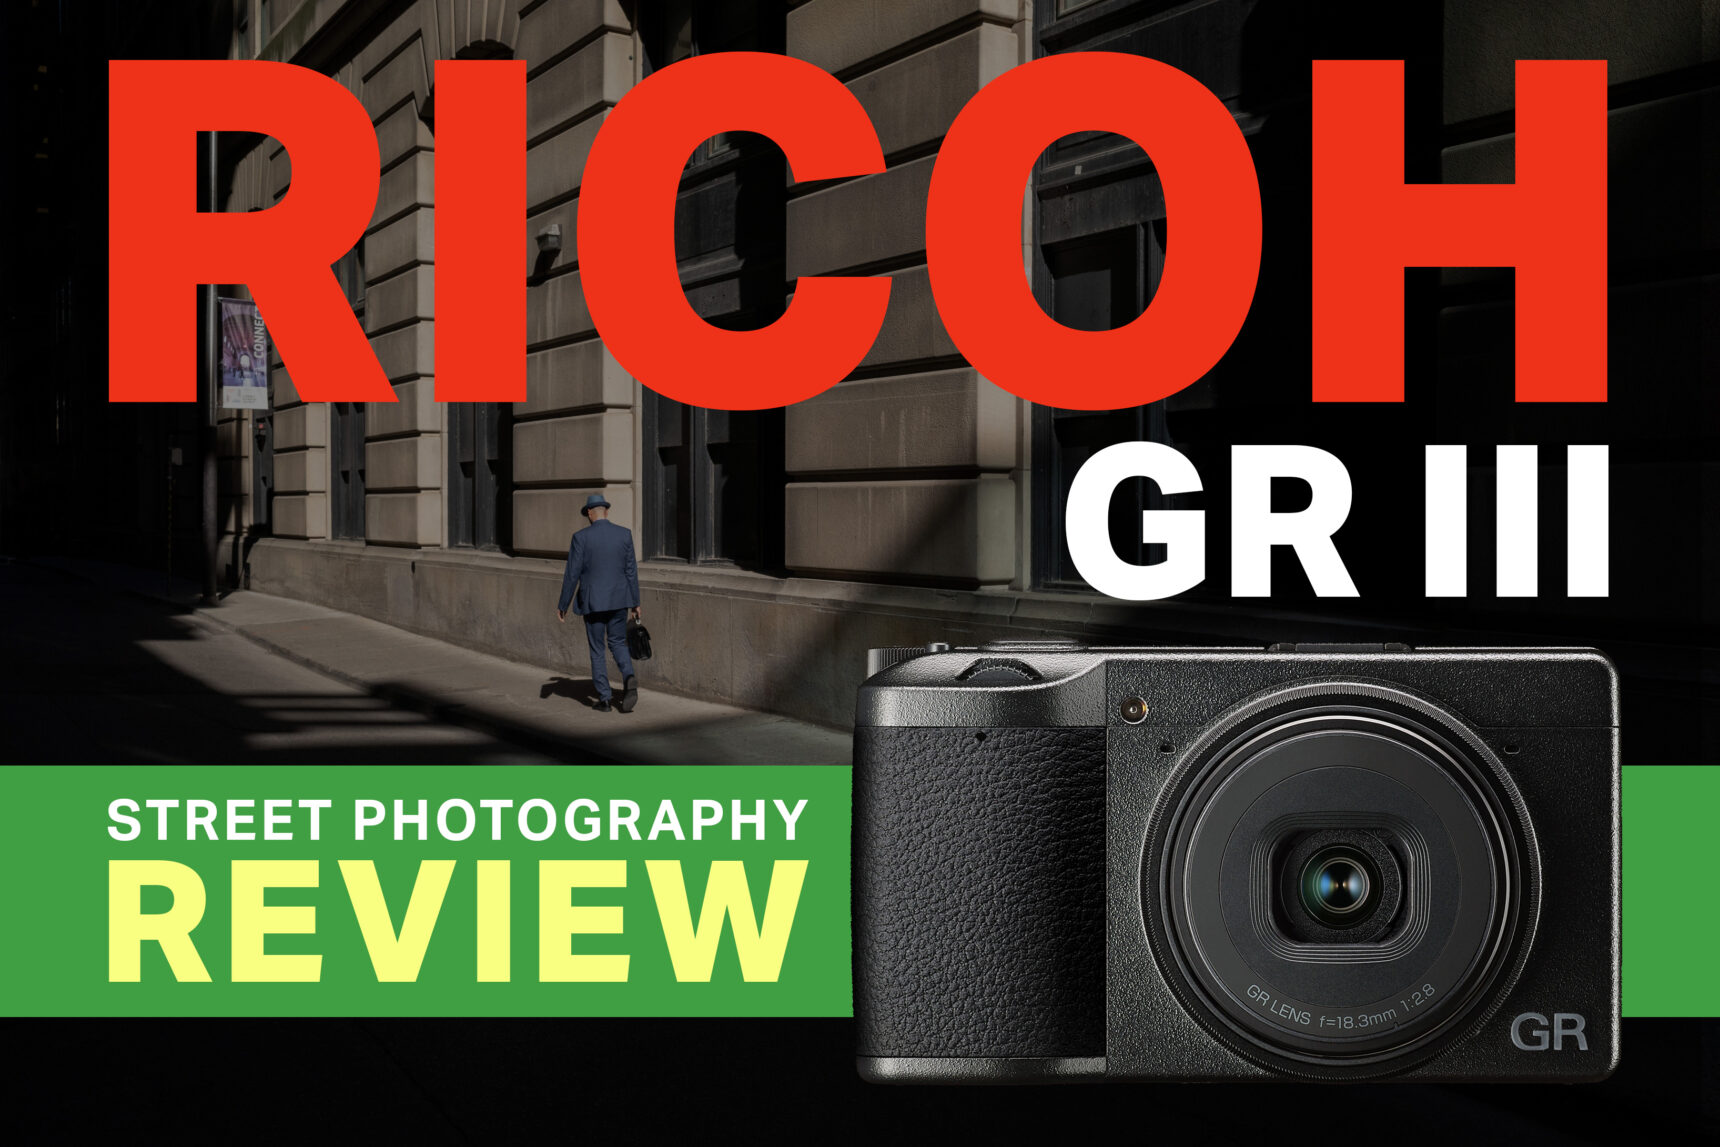 Ricoh GR III Street Photography Review - Long Live The King! - StreetShootr